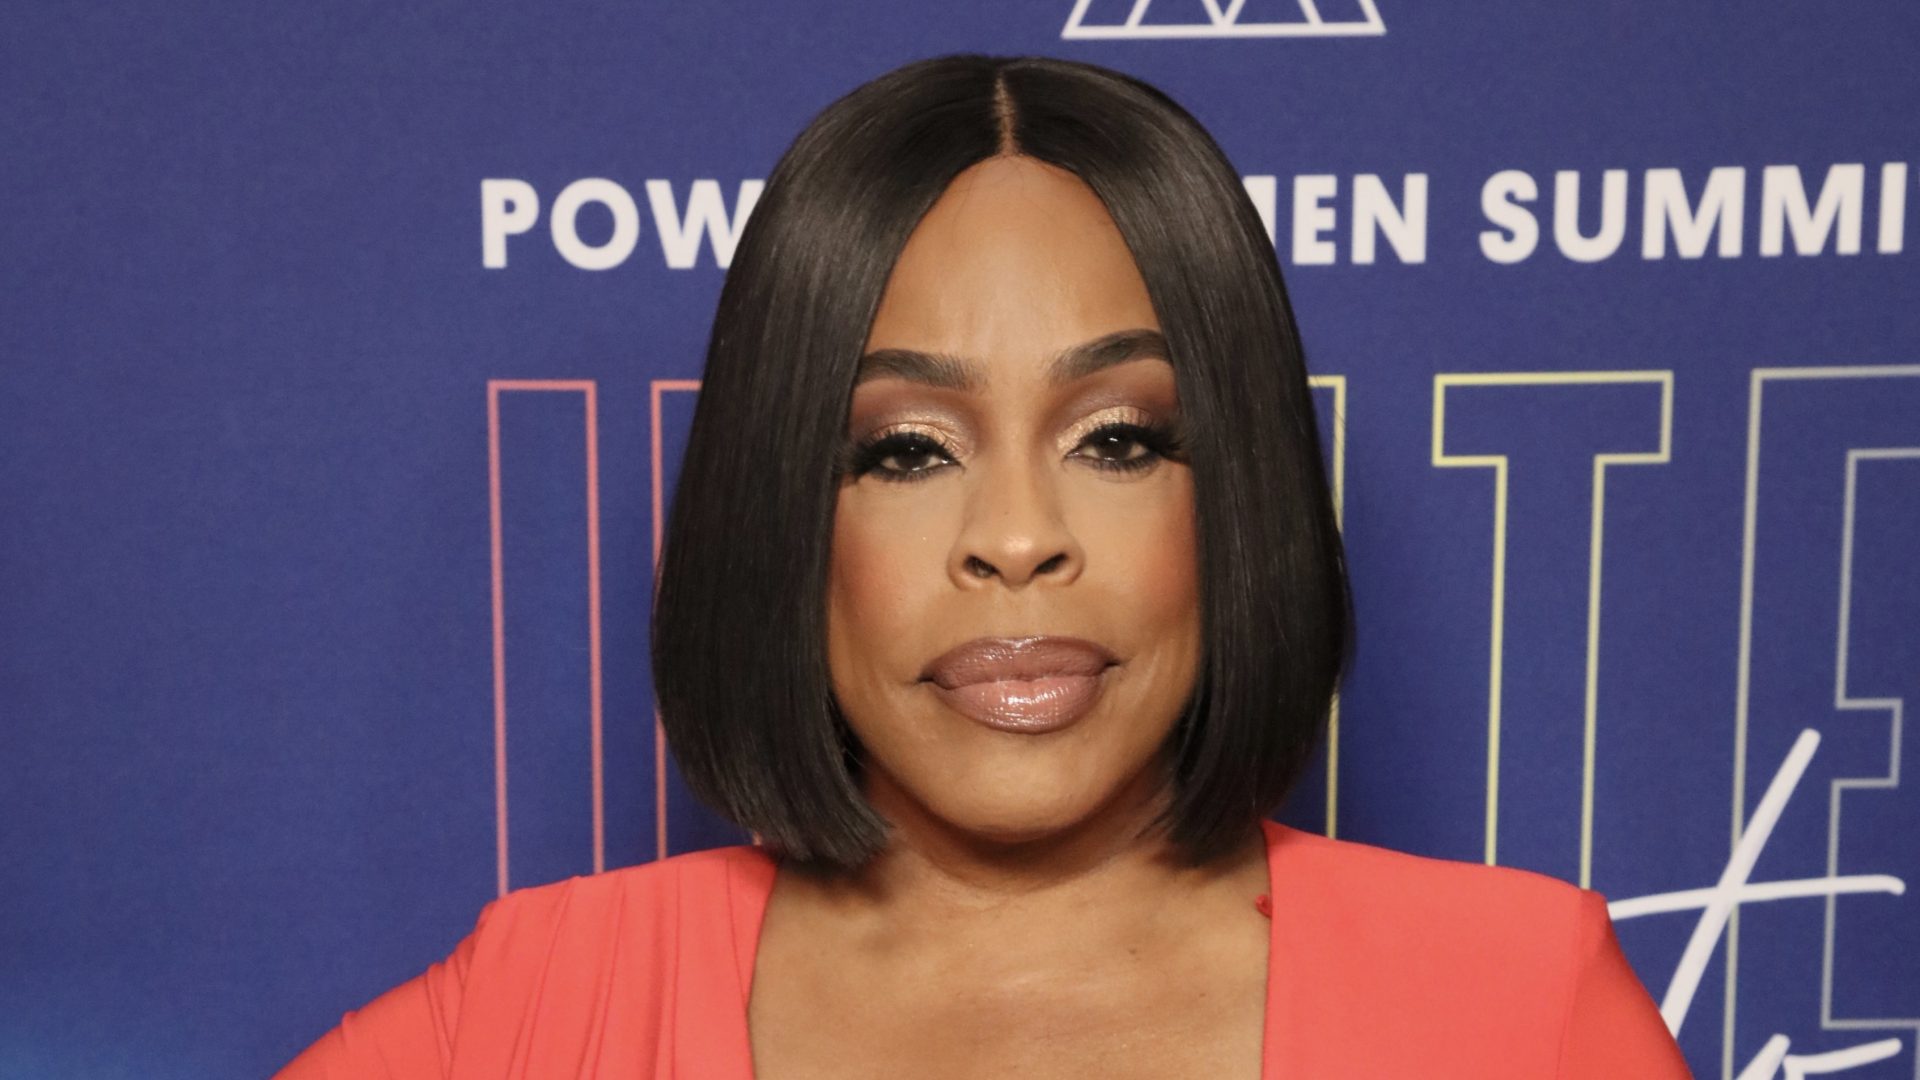 Niecy Nash Reflects On Passing Of 17-Year-Old Brother Who Died On HS Campus In Wake Of Nashville Shooting